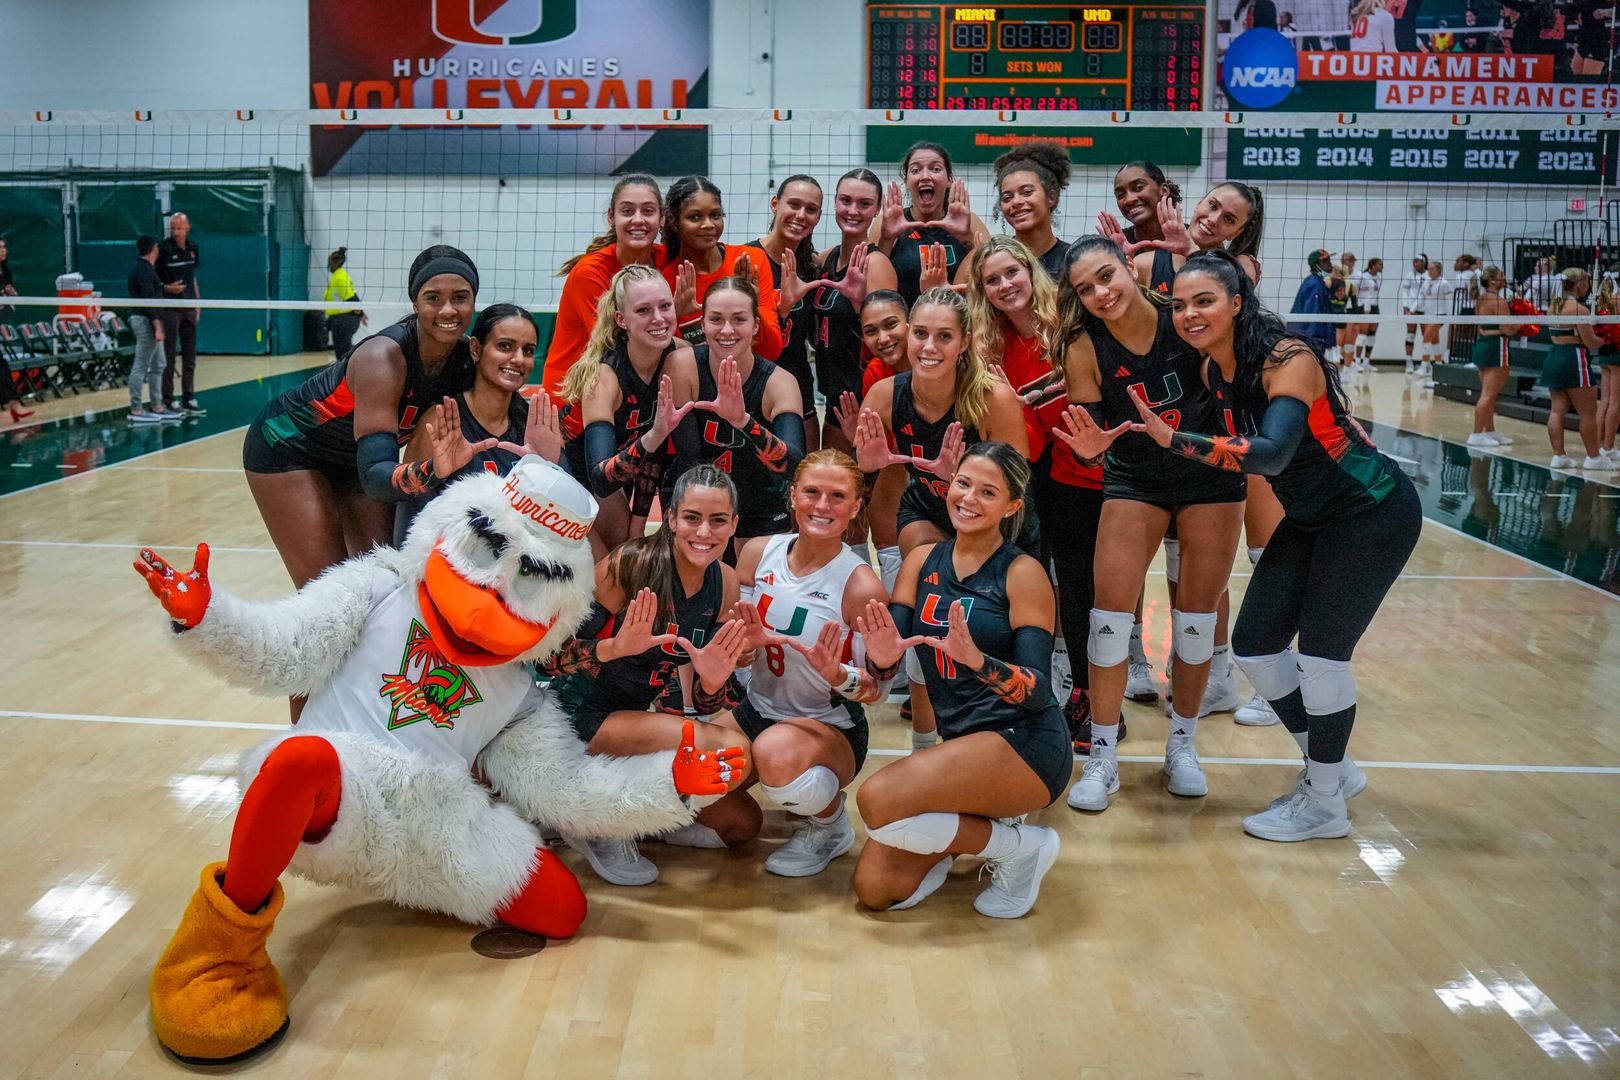 VB Claims 3-1 Victory Over Maryland To Open 2023 Season